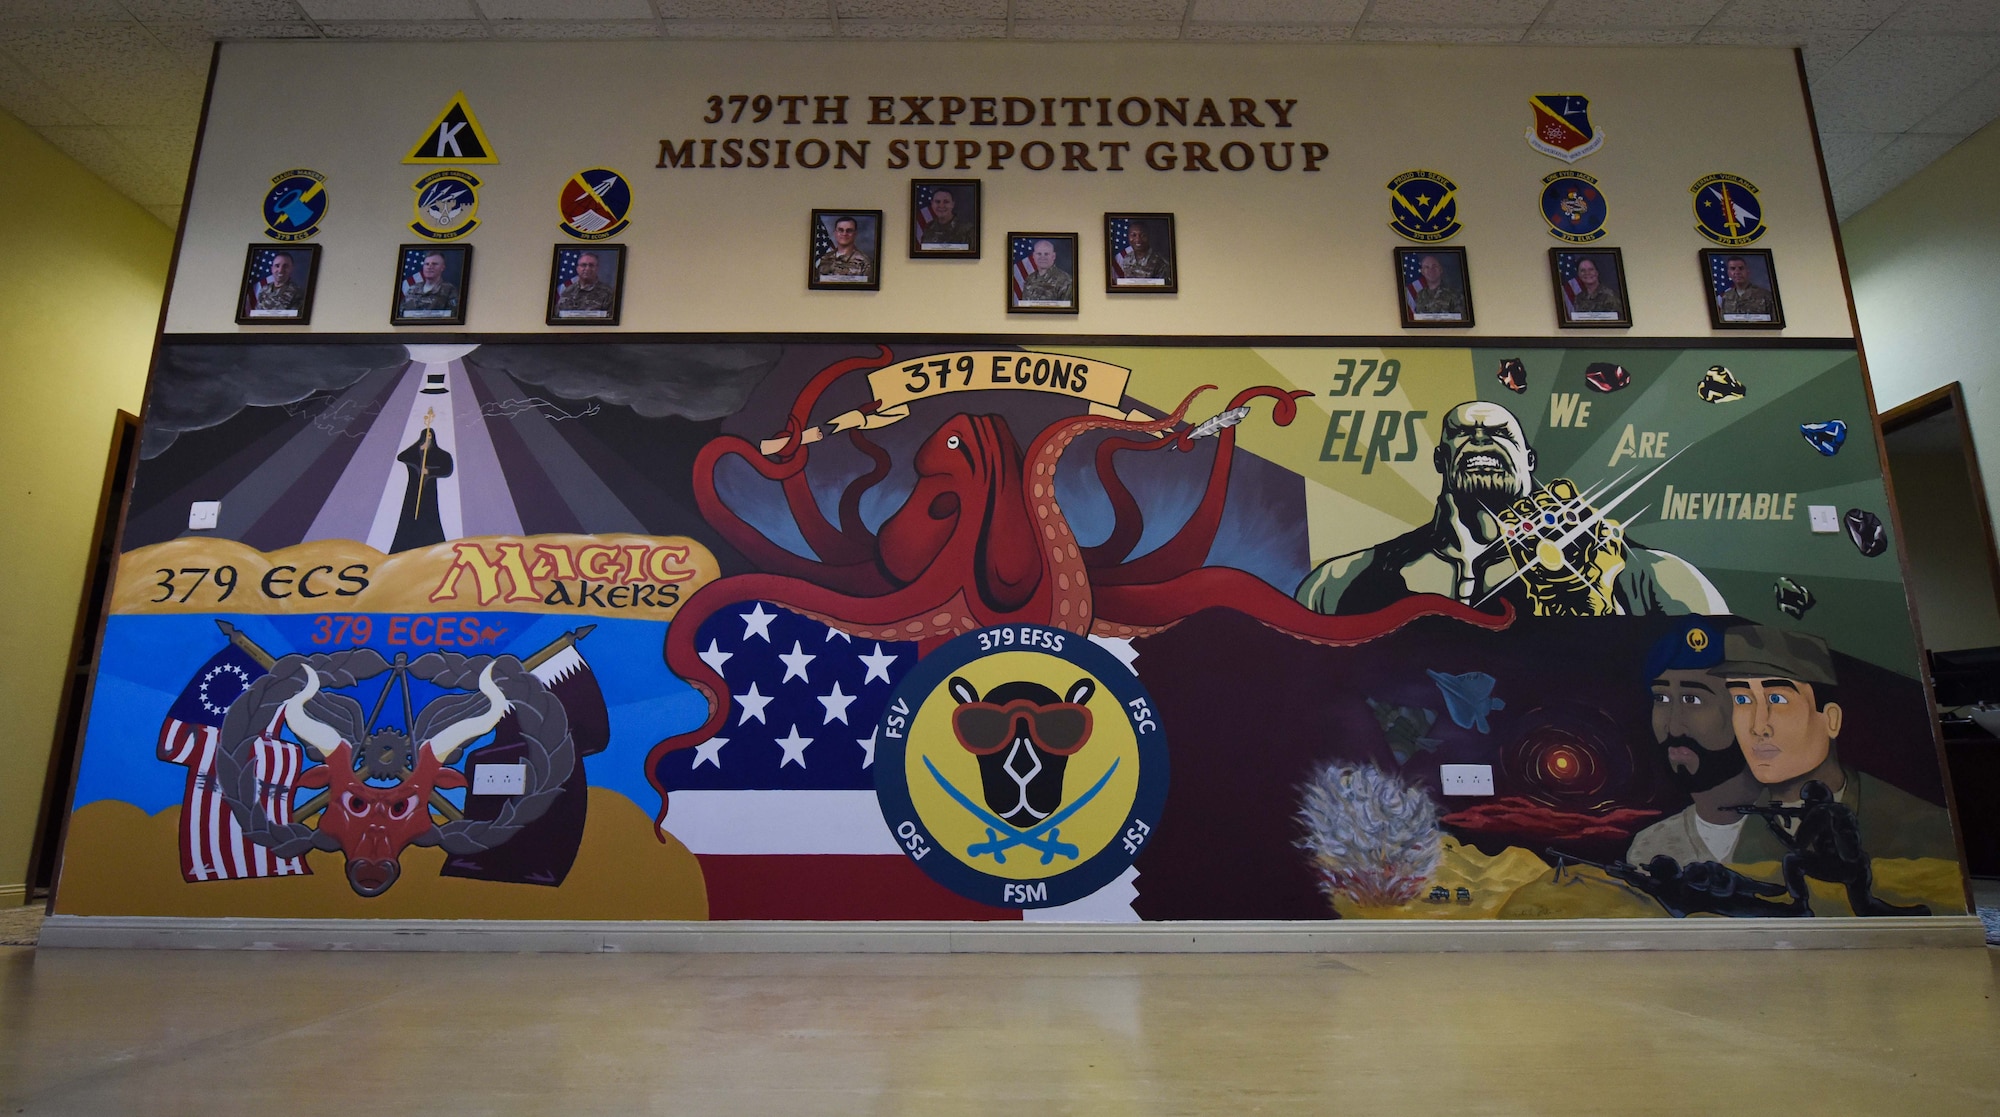 The finished mural is displayed in the 379th Expeditionary Mission Support Group building at Al Udeid Air Base, Qatar on Dec. 5, 2019. The 379th EMSG is comprised of six squadrons represented in different areas on the wall. (U.S. Air Force photo by Senior Airman Shay Stuart)